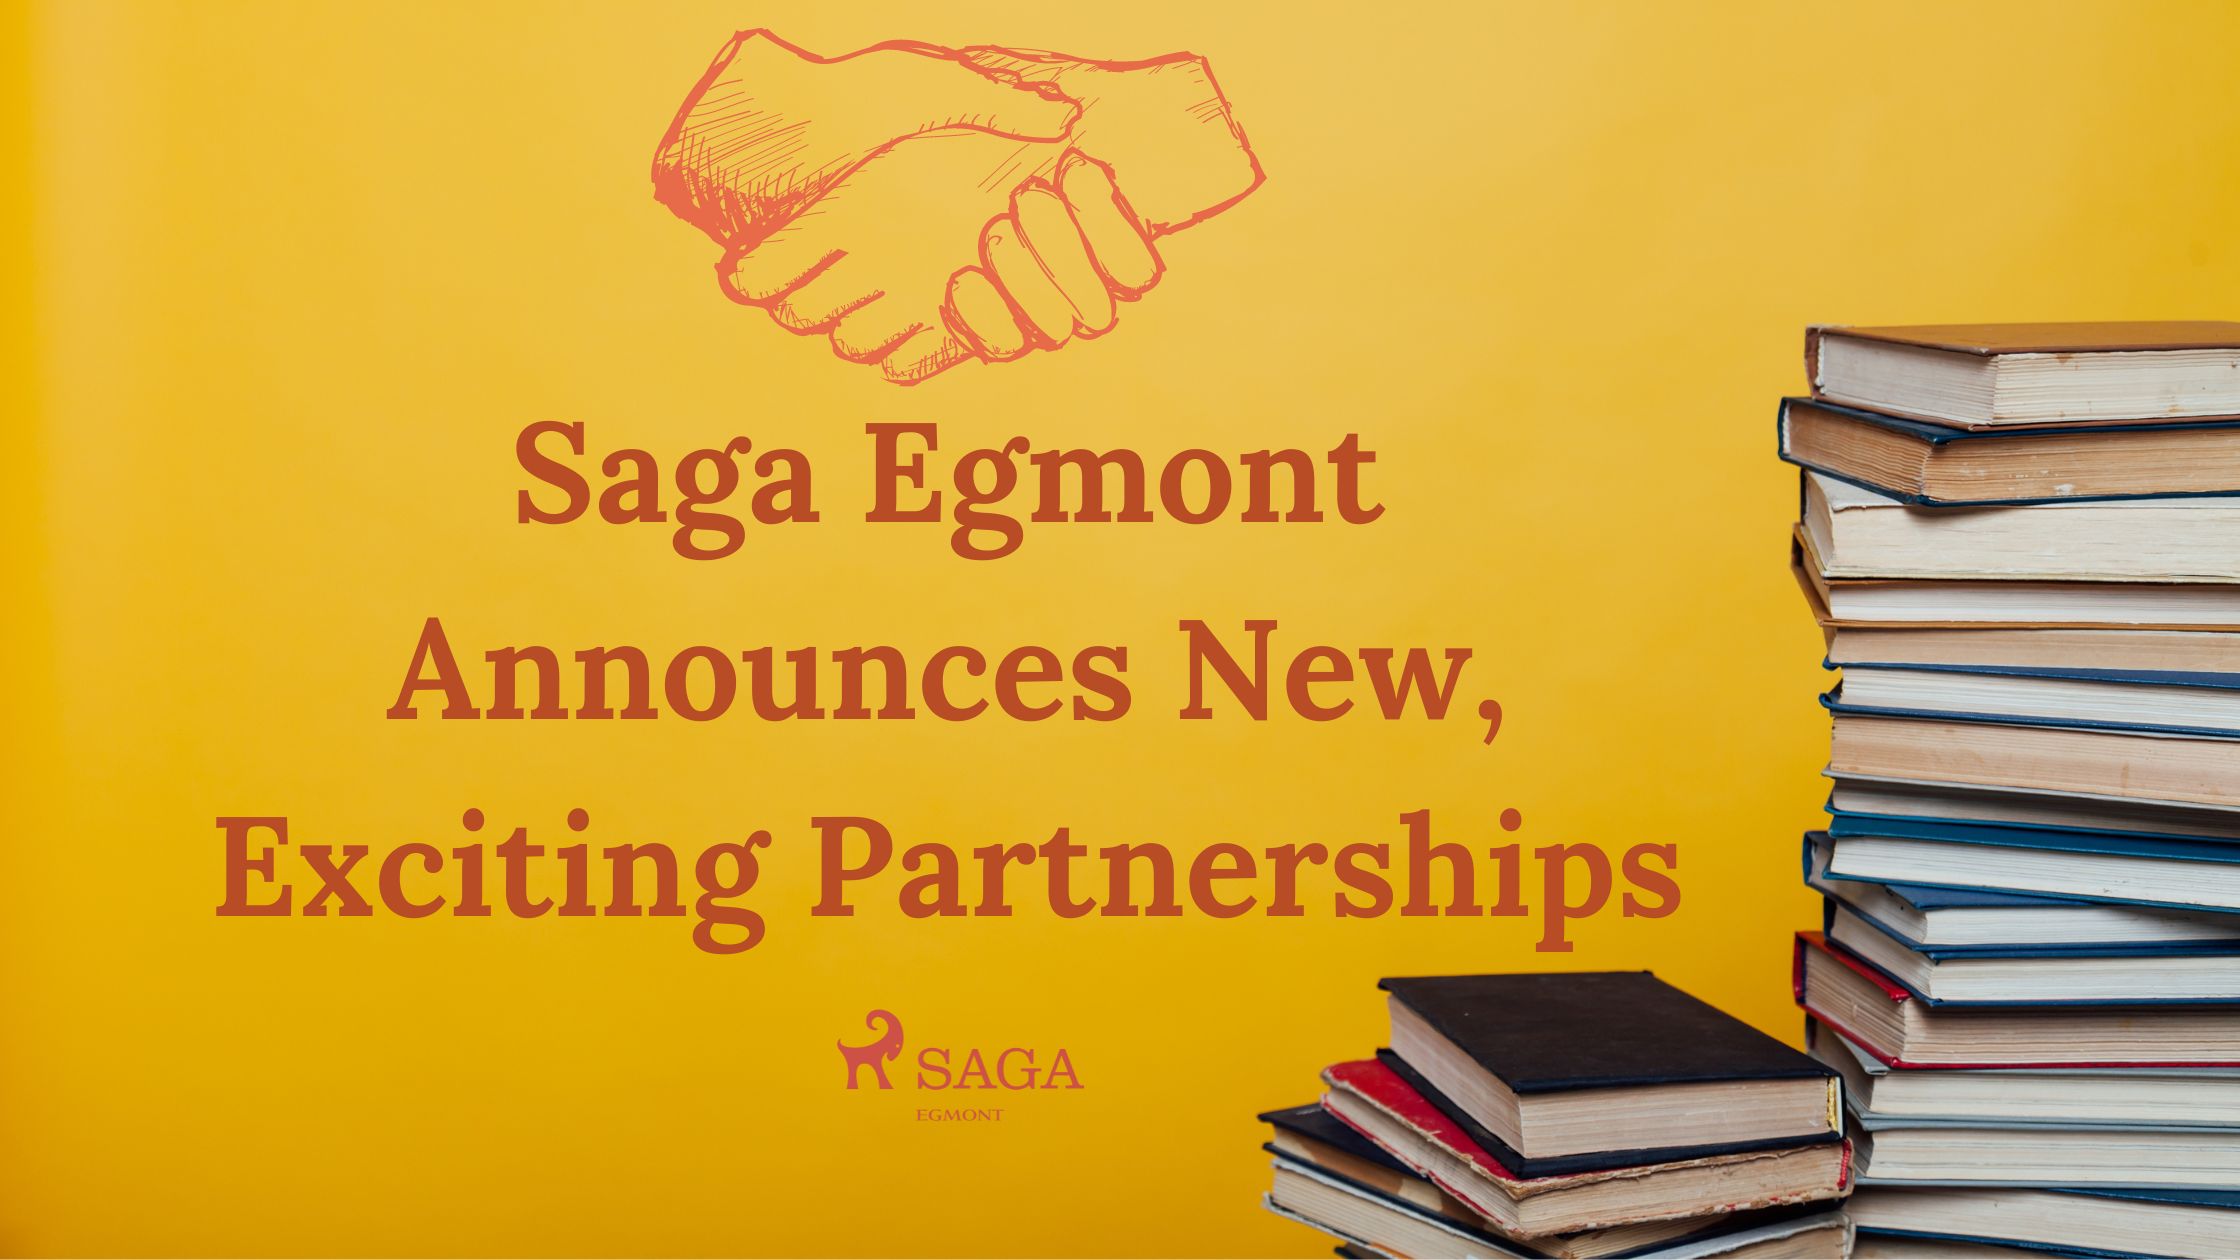 More than 100 years of giving back; The Charitable Work of the Egmont  Foundation - Storiesbysaga